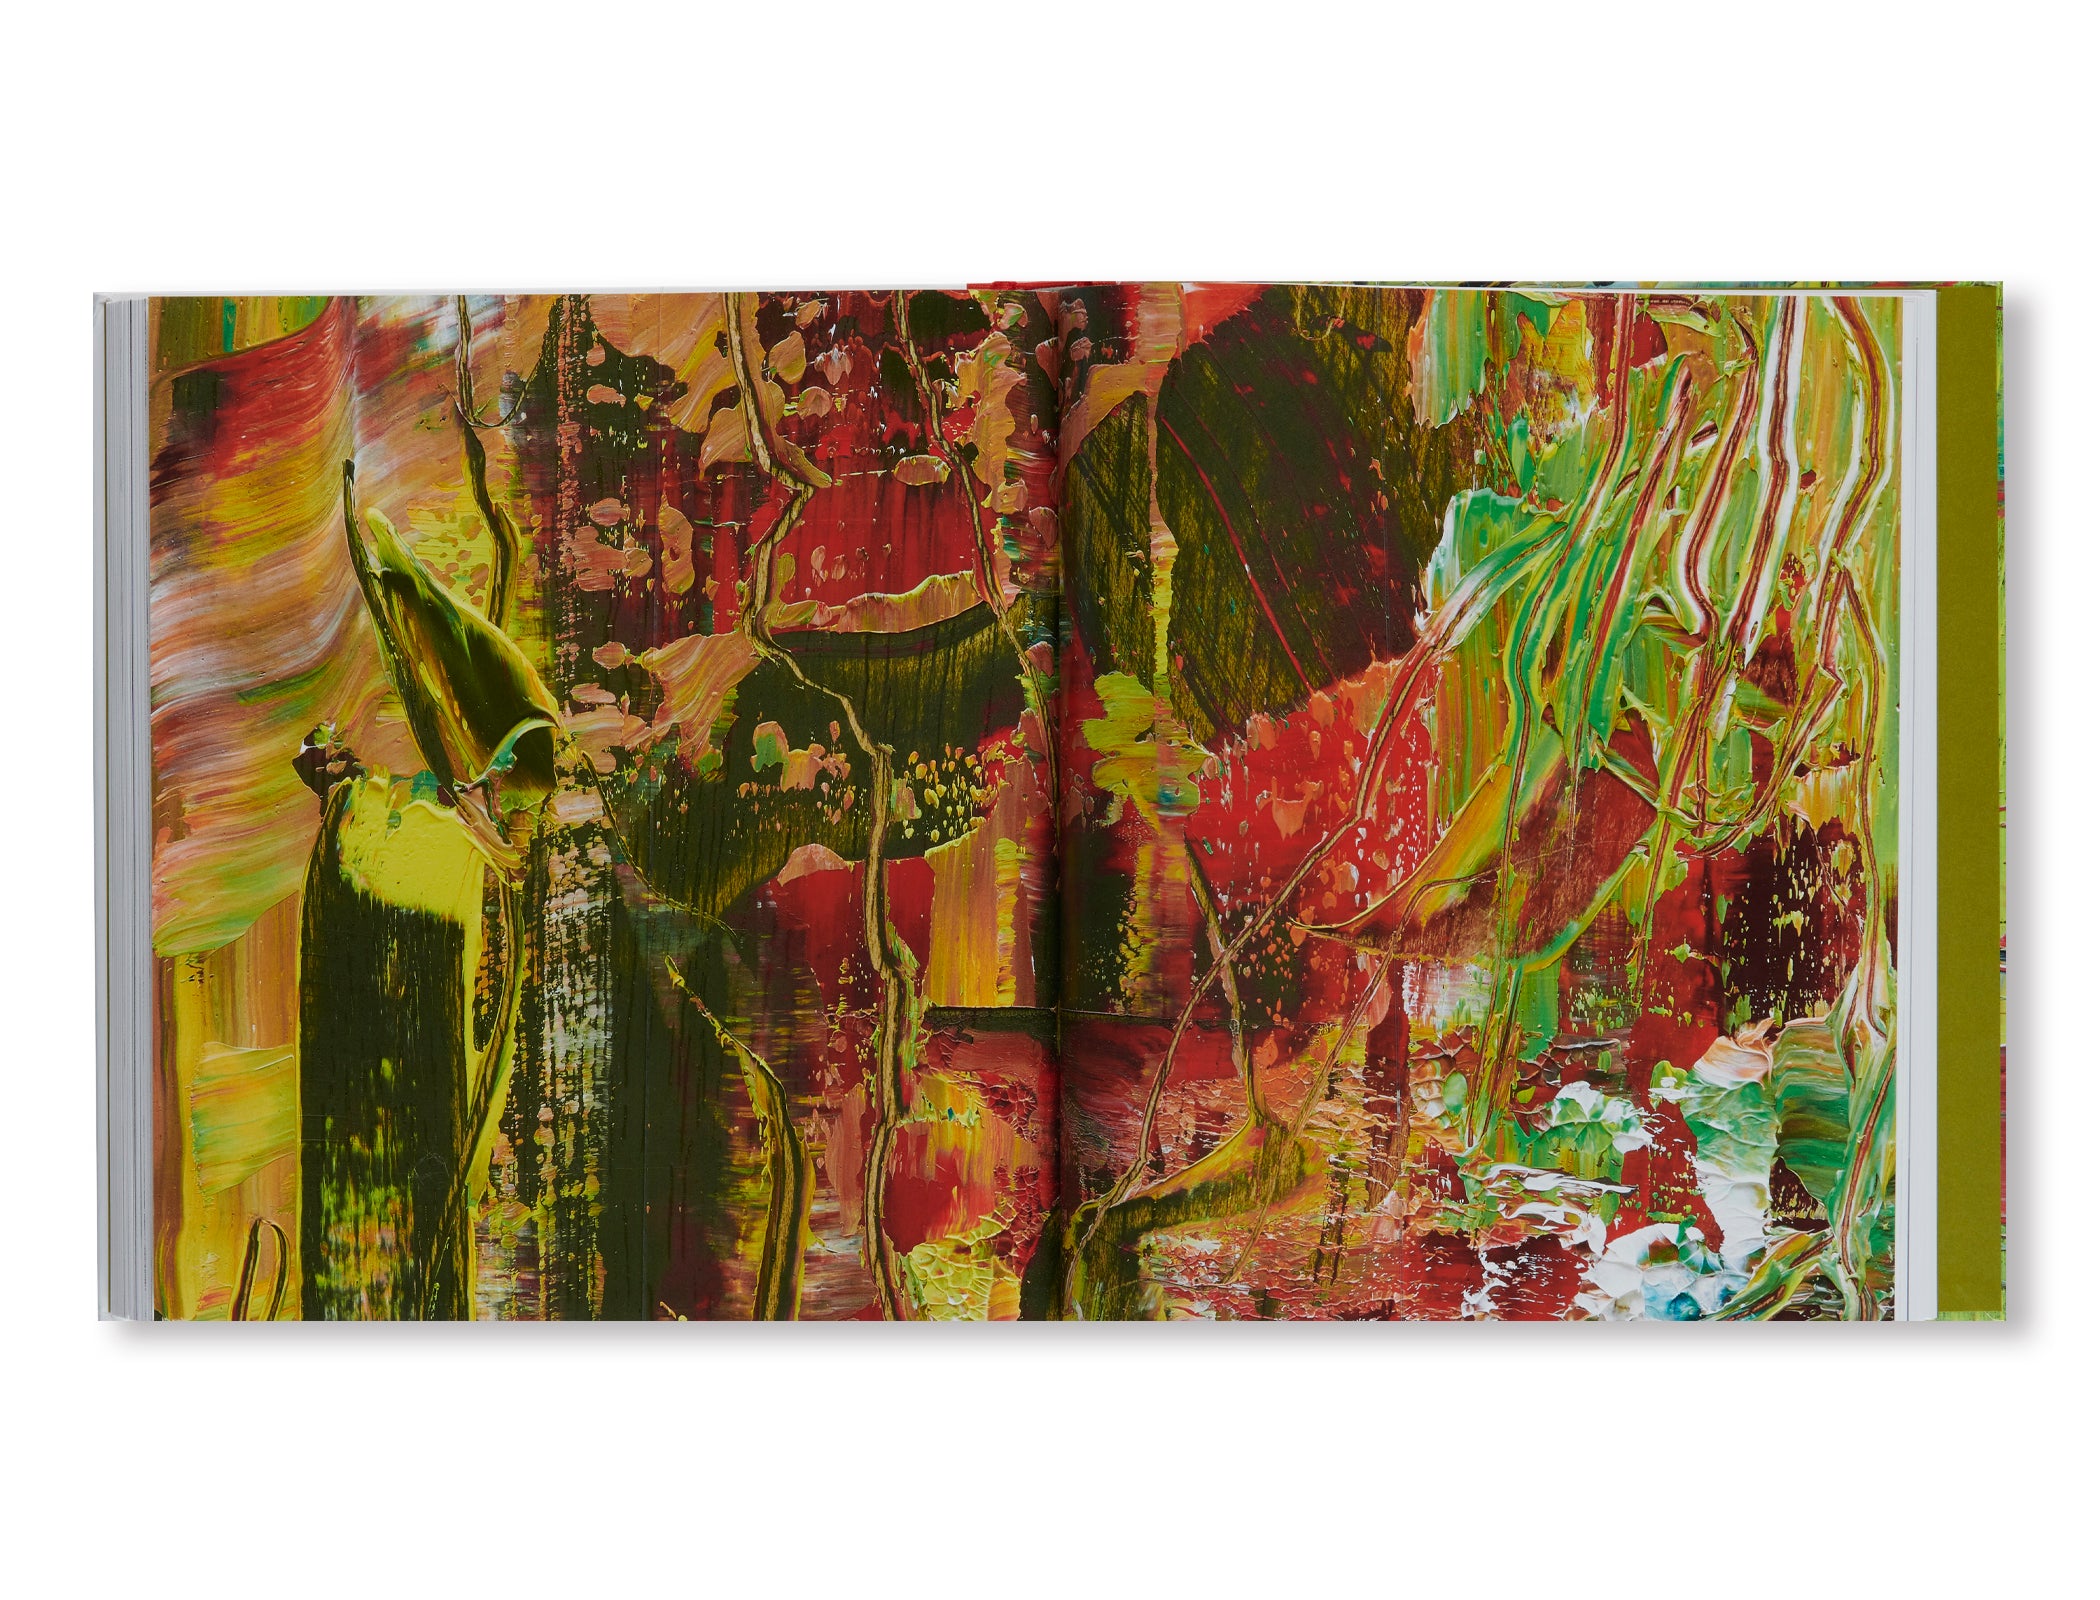 PAINTING AFTER ALL by Gerhard Richter